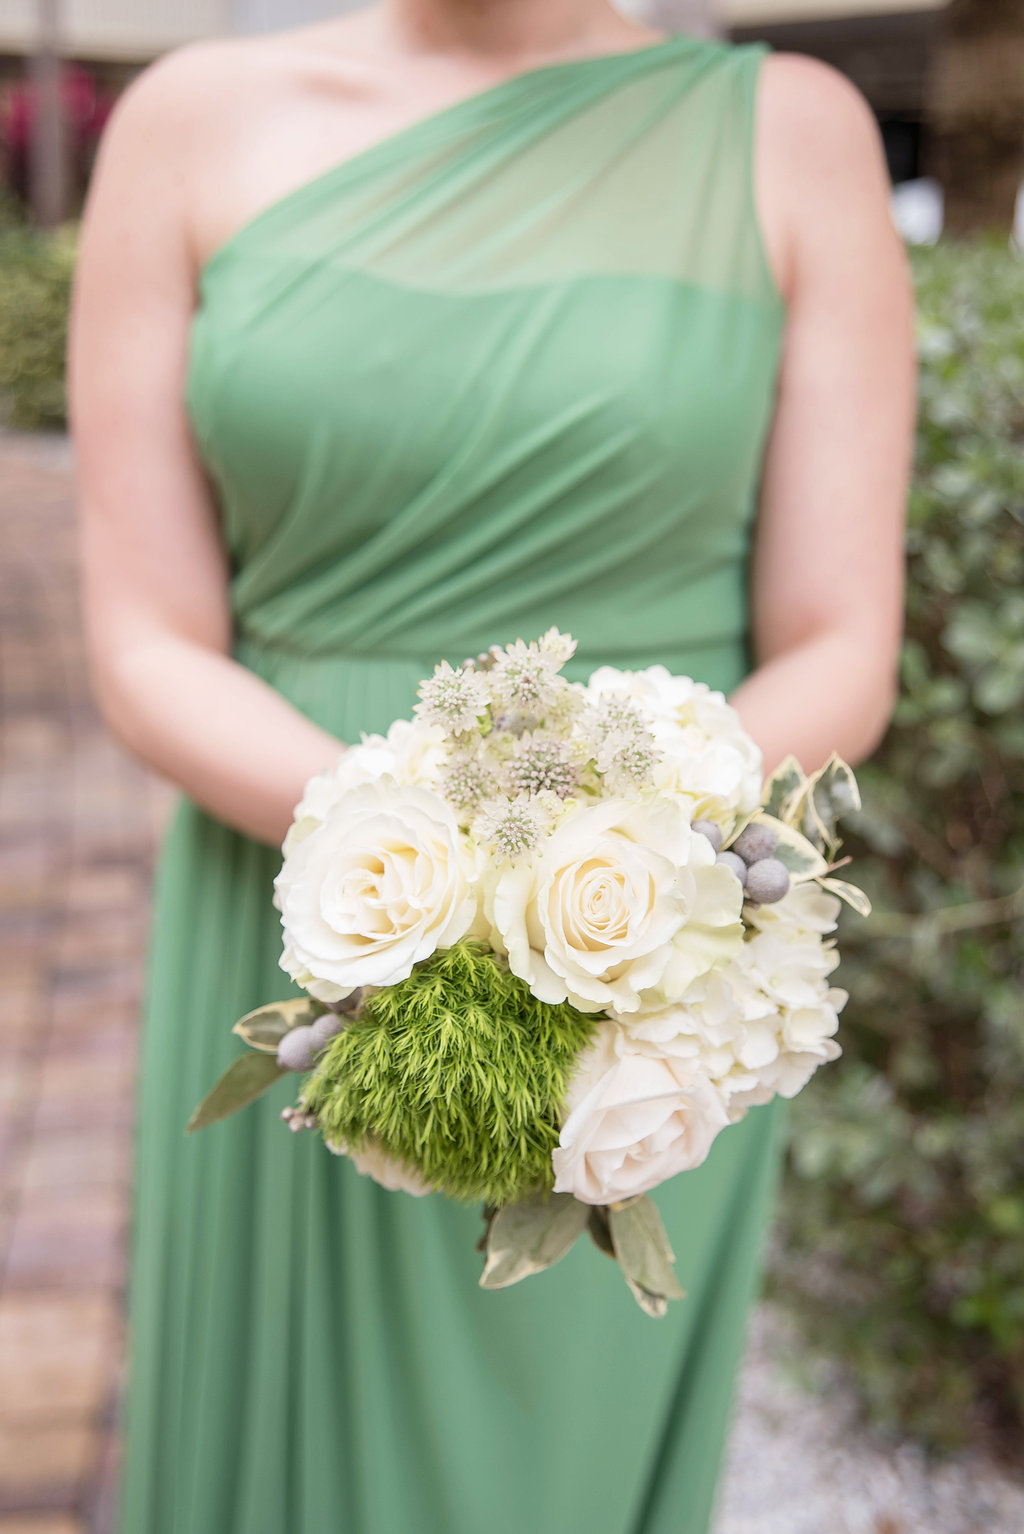 Green David's Bridal Bridesmaids Dress with Ivory Wedding Bouquet of Flowers with Roses, Succulents and Greenery